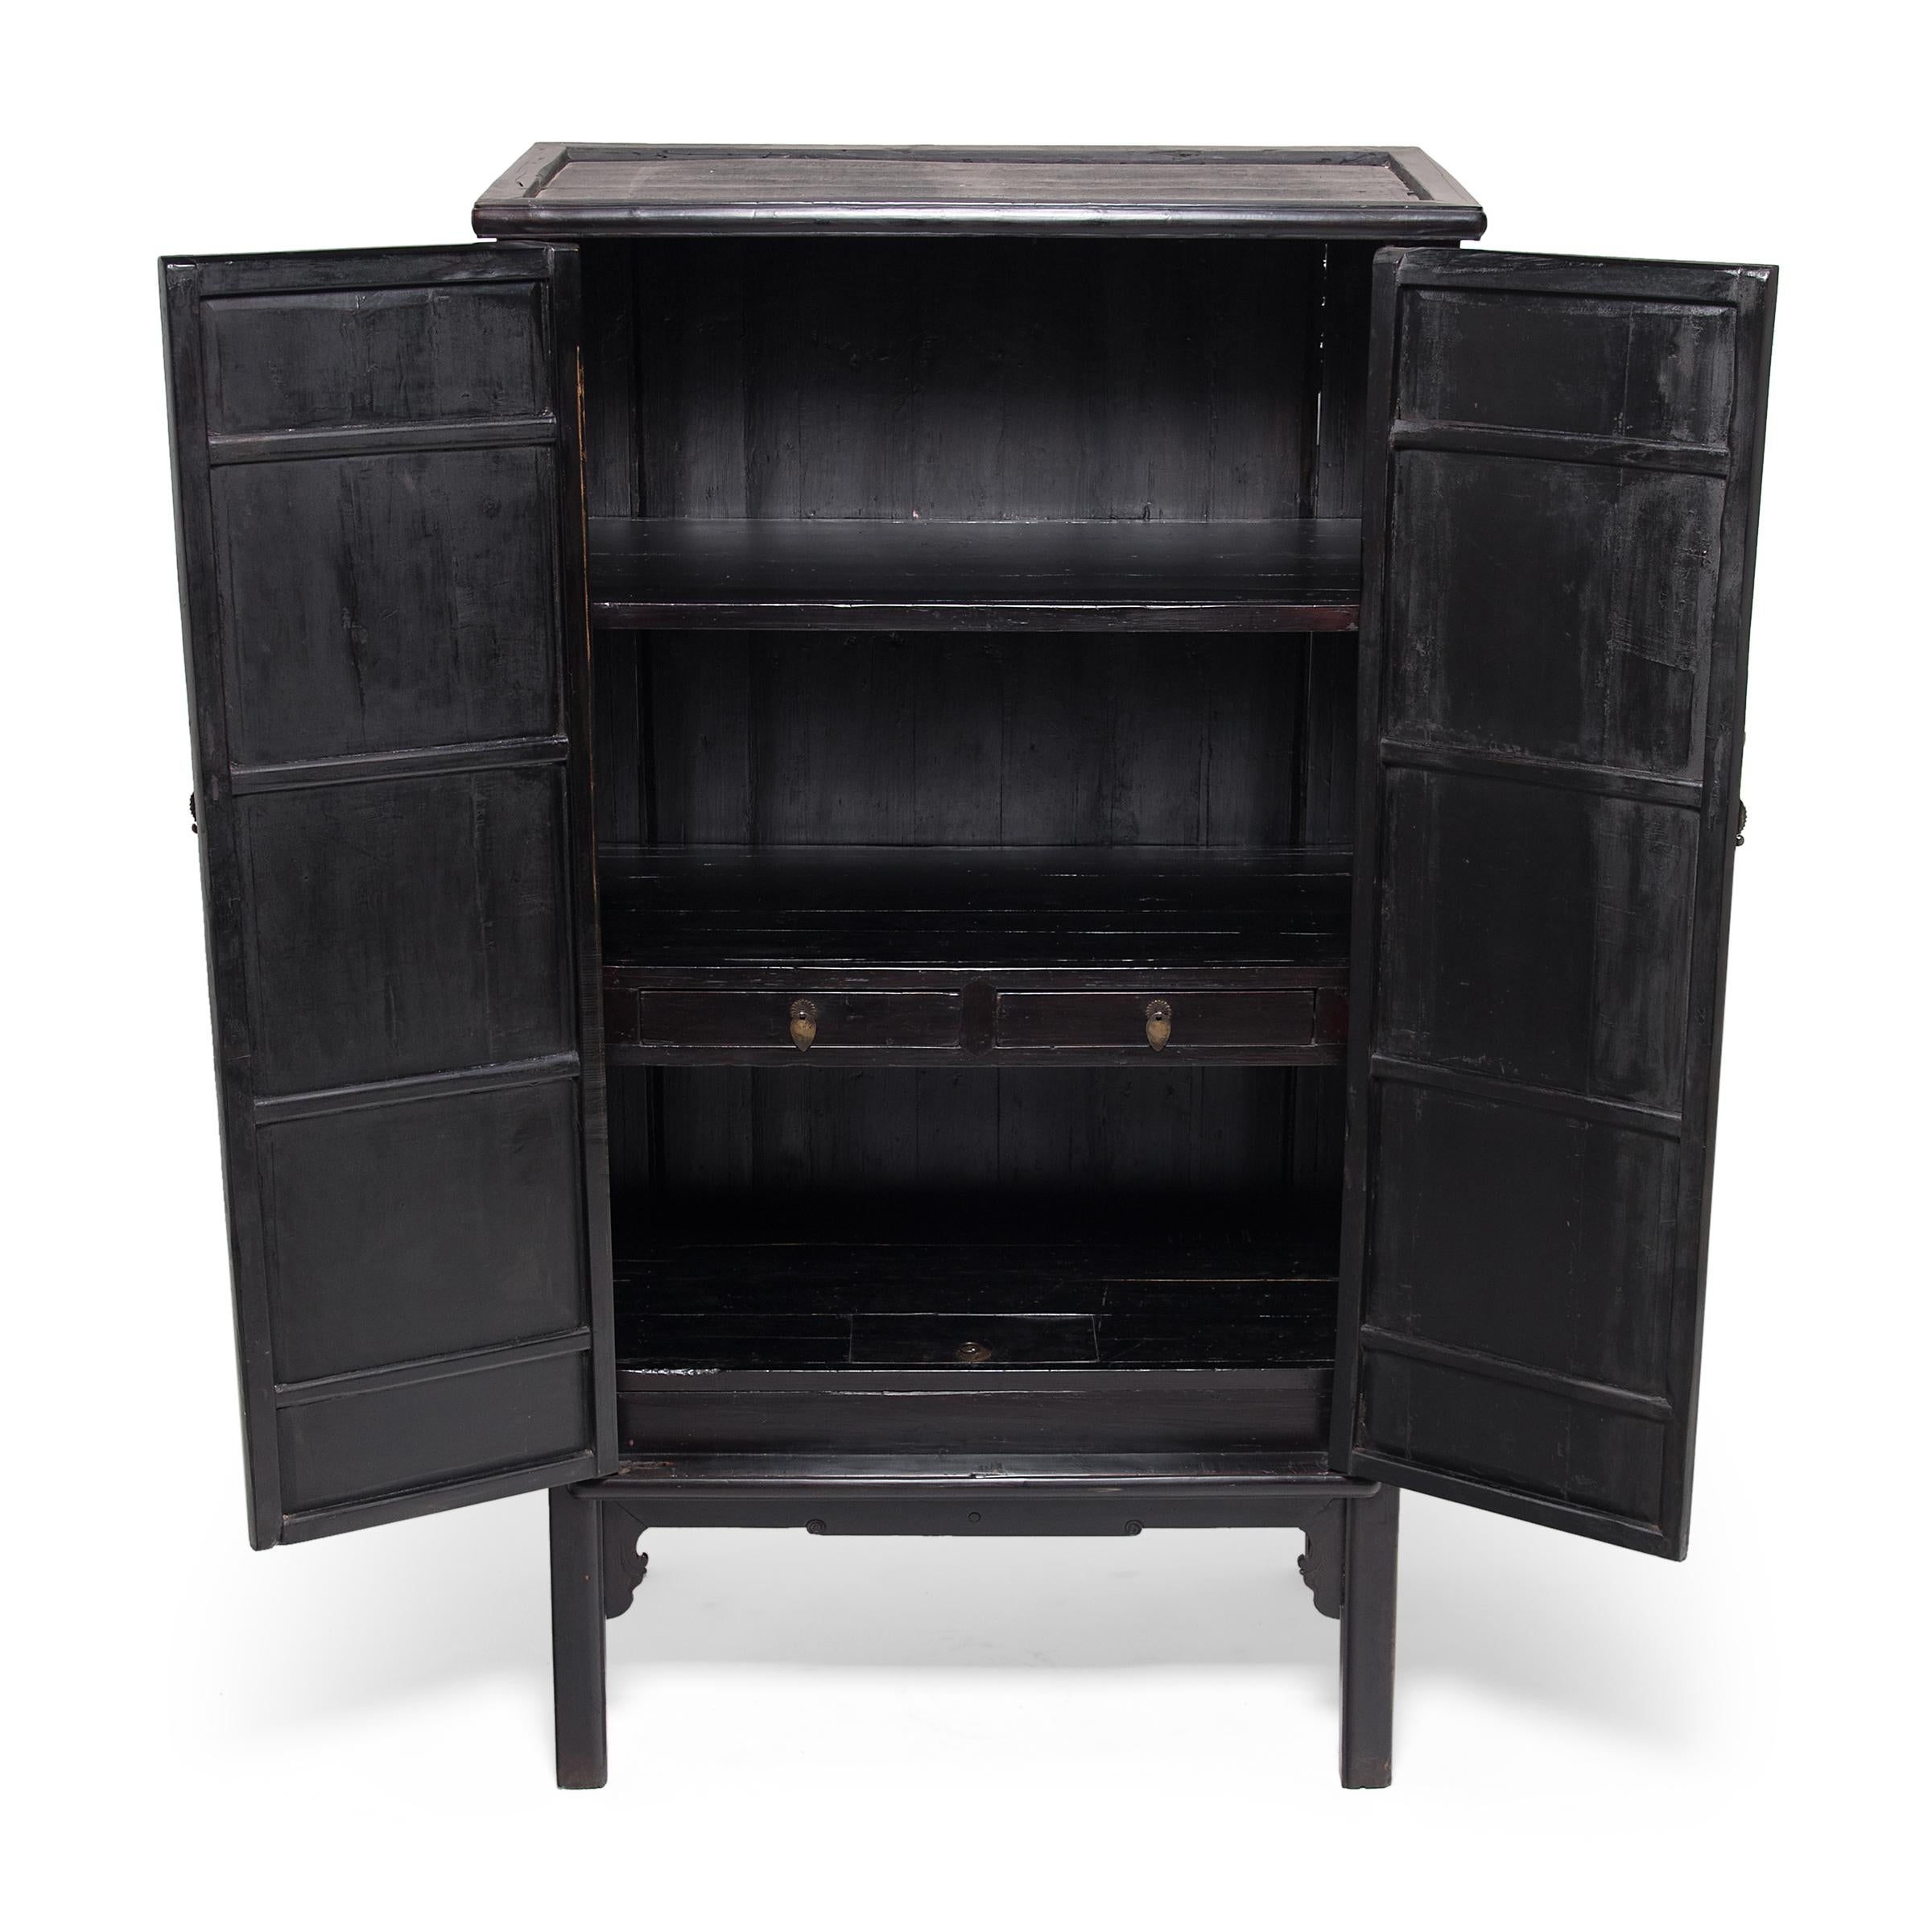 Elm Chinese Black Lacquer Scholar's Cabinet, circa 1850